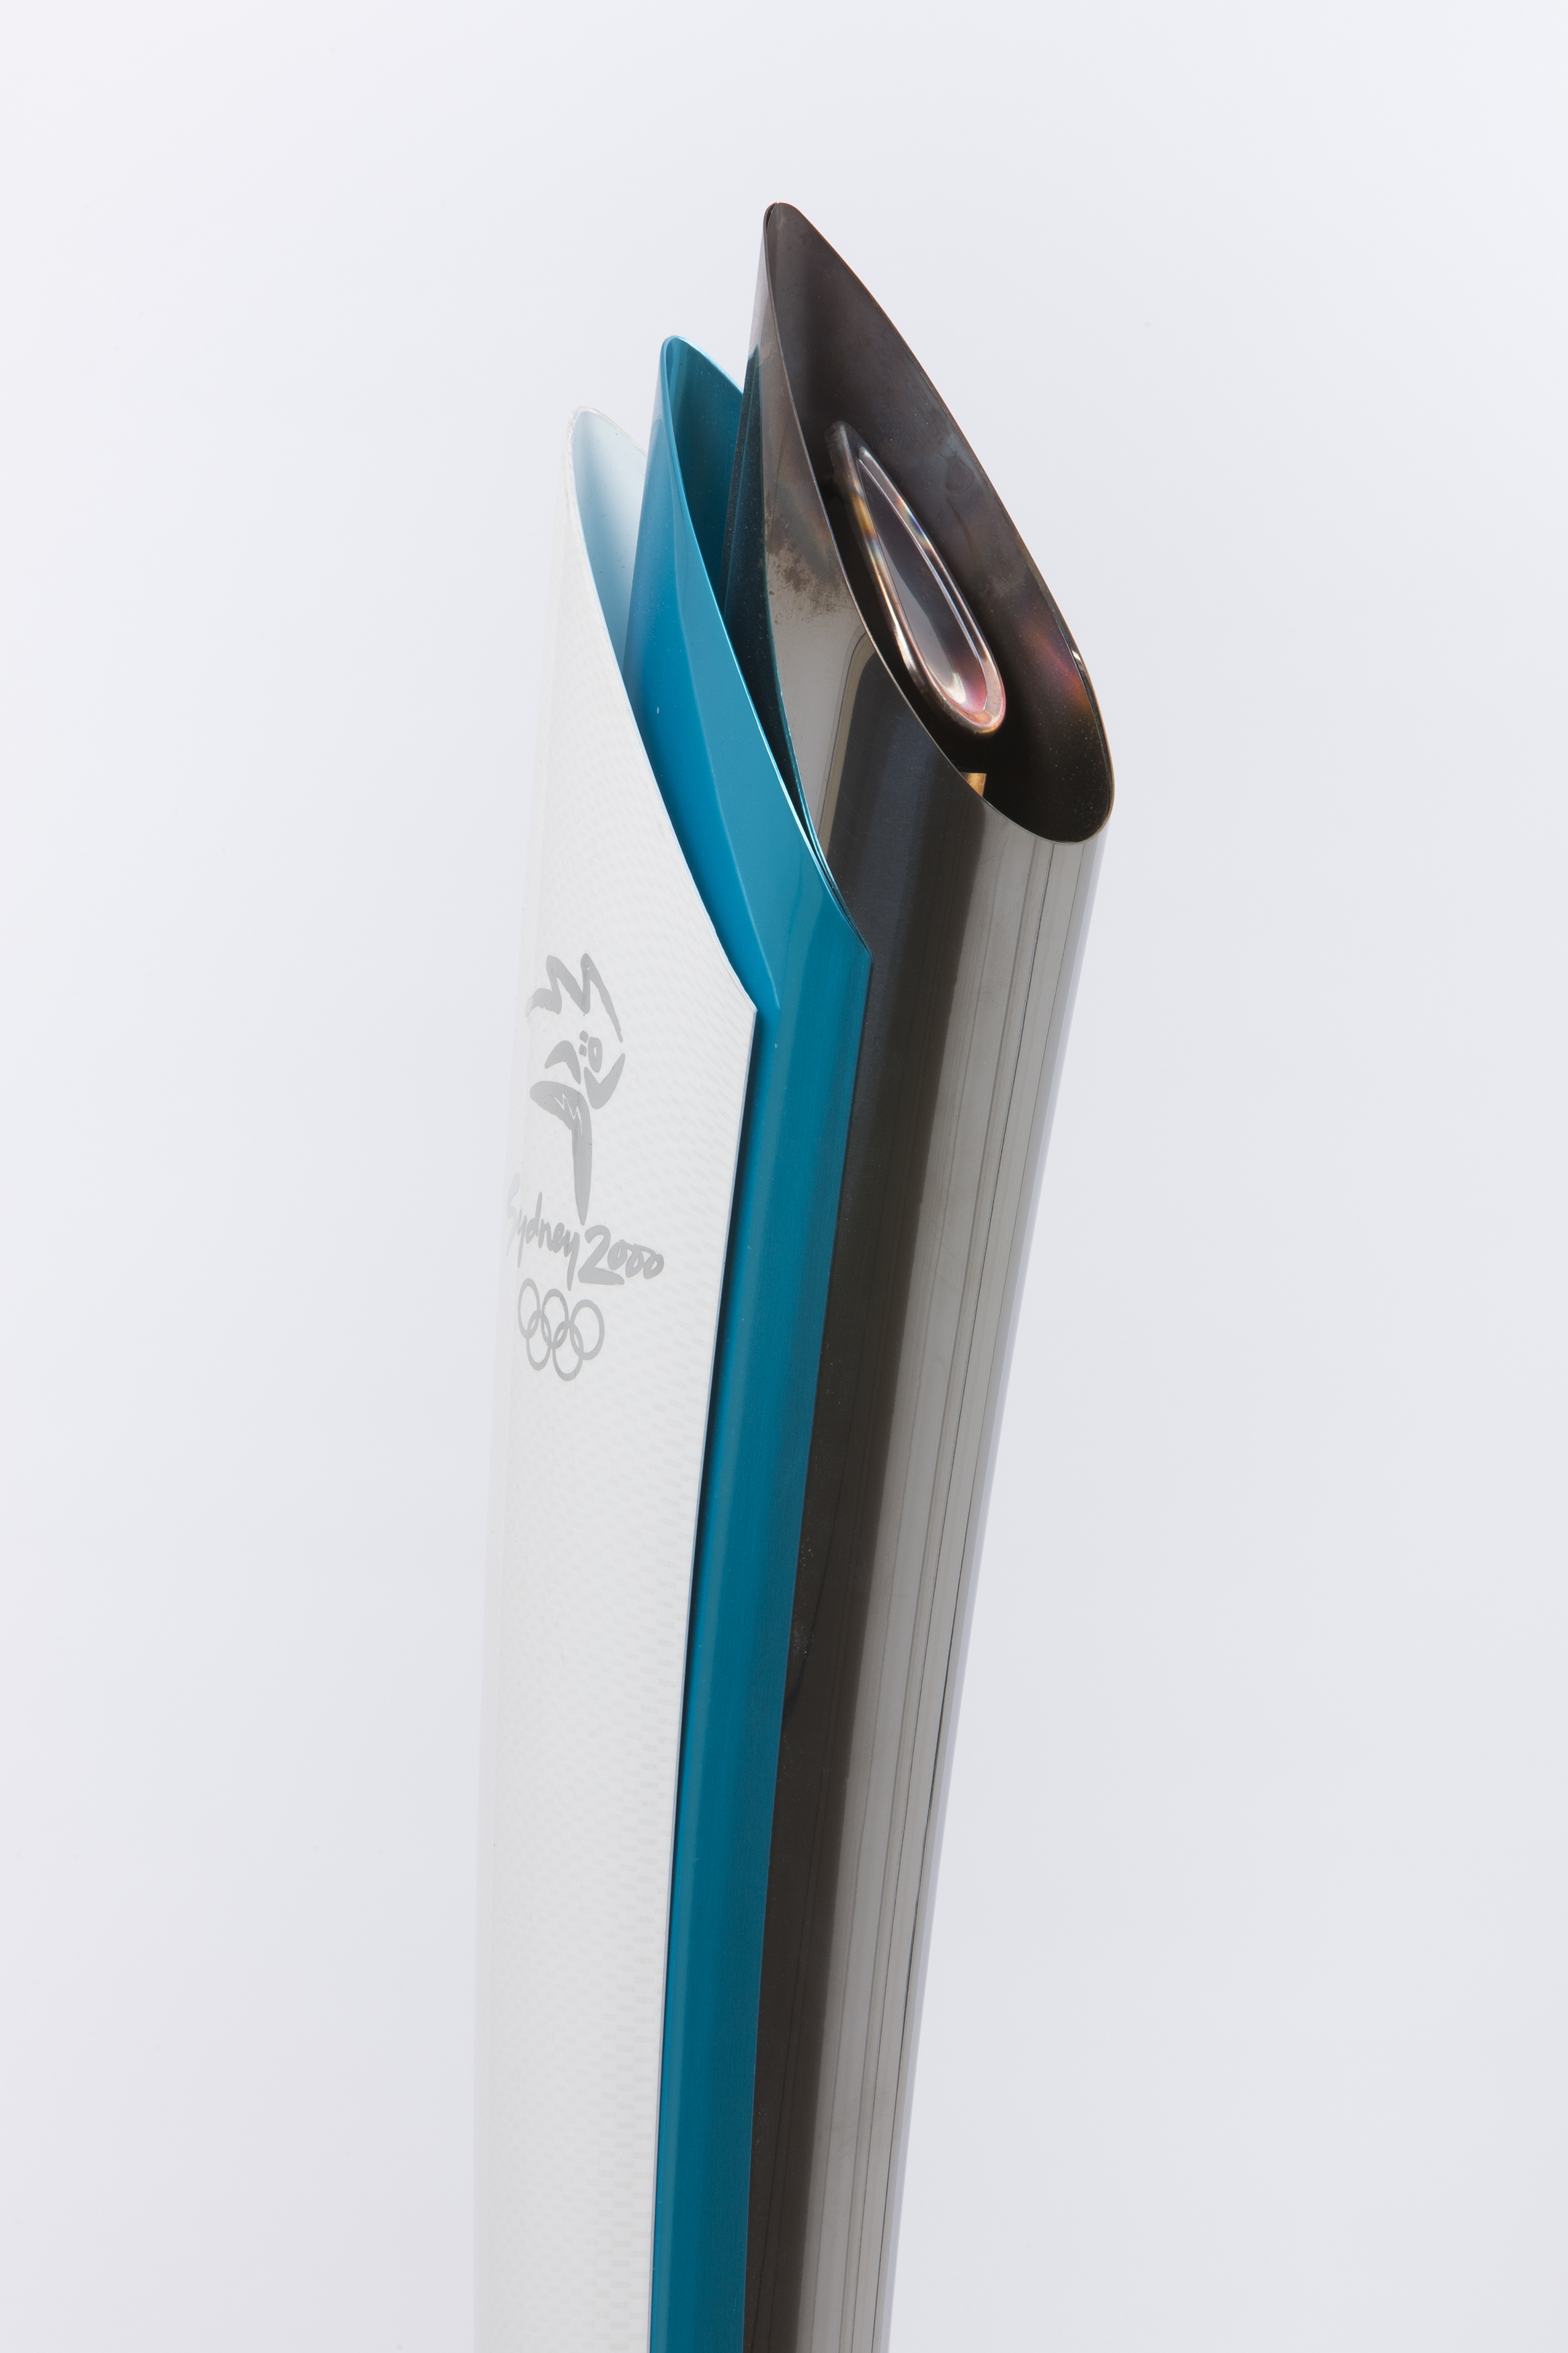 Sydney 2000 Olympic Games torch used by Cathy Freeman